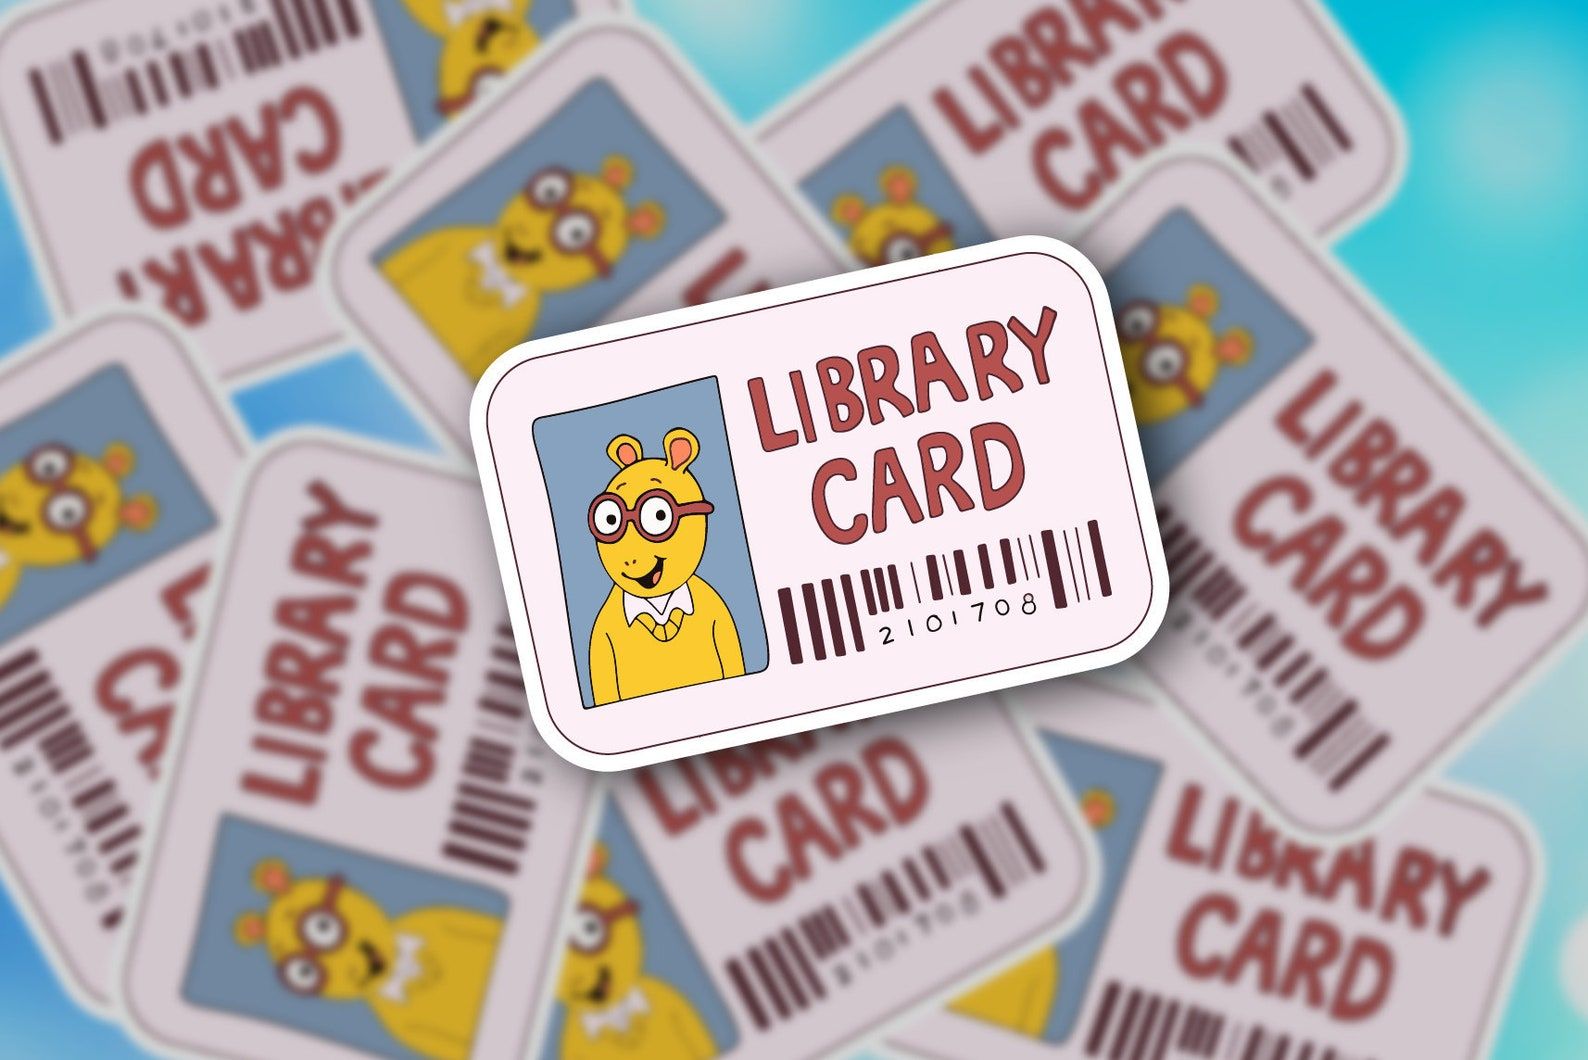 Image of a sticker in the shape of a library card. It reads Library Card, with a bar code below, and the image on the card is of Arthur. 